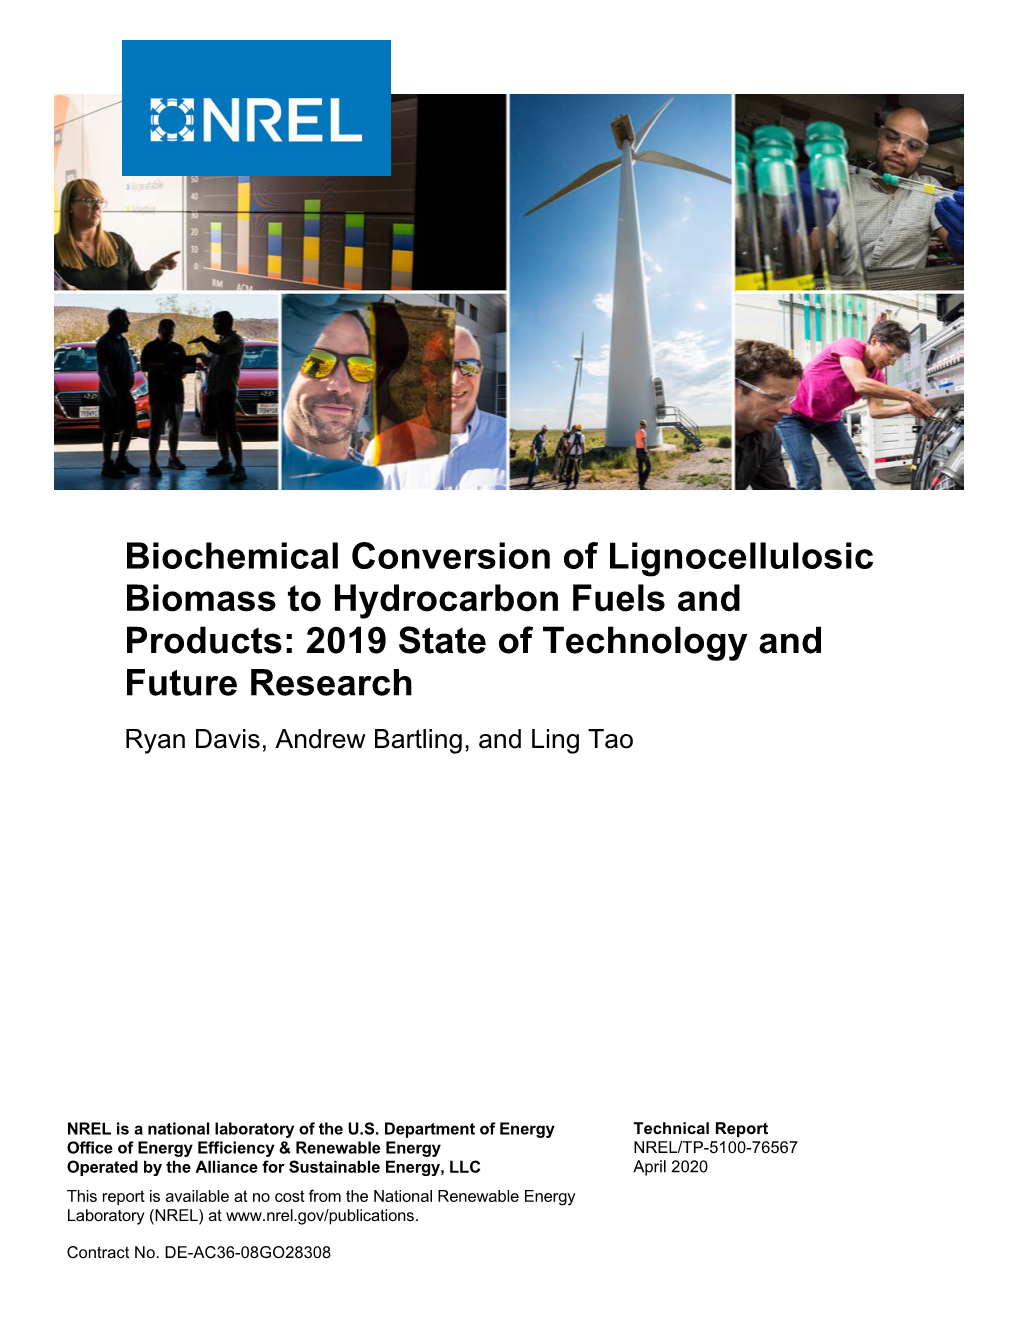 Biochemical Conversion of Lignocellulosic Biomass To